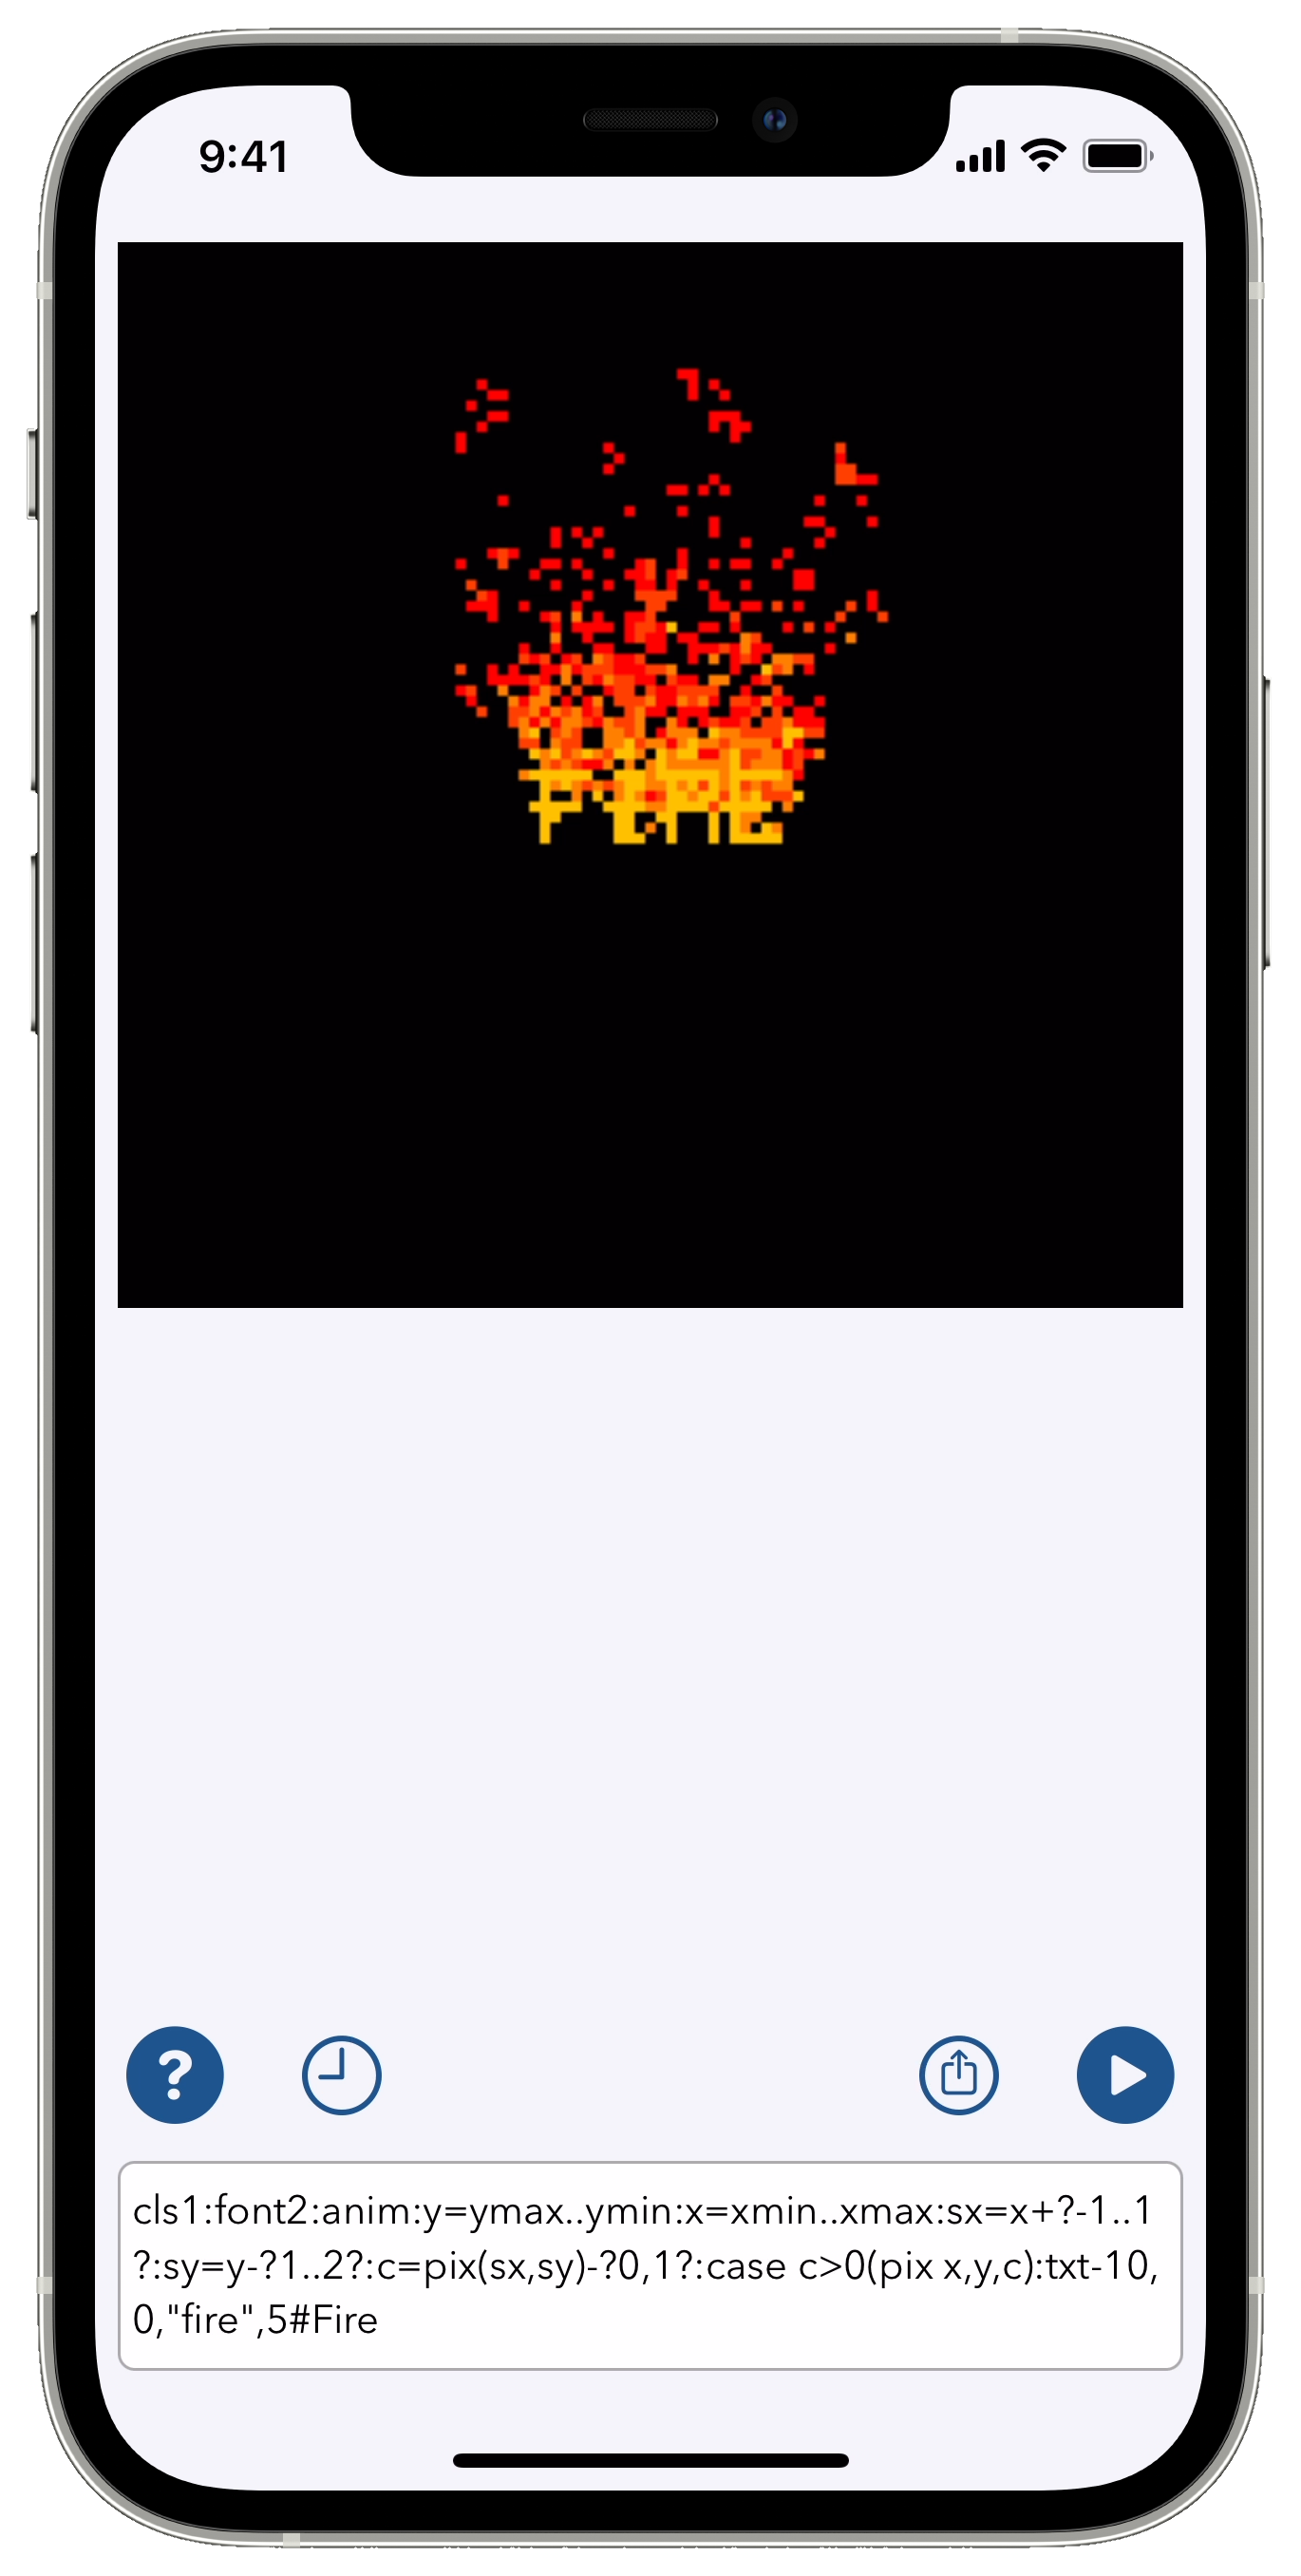 PixelNote, running a simulated-flames demo program; the pixel display has a black background and contains the word FIRE in yellow with yellow, orange, and red pixels emulating flames as if it were on fire, and the text field at the bottom contains the code which produces this animation.